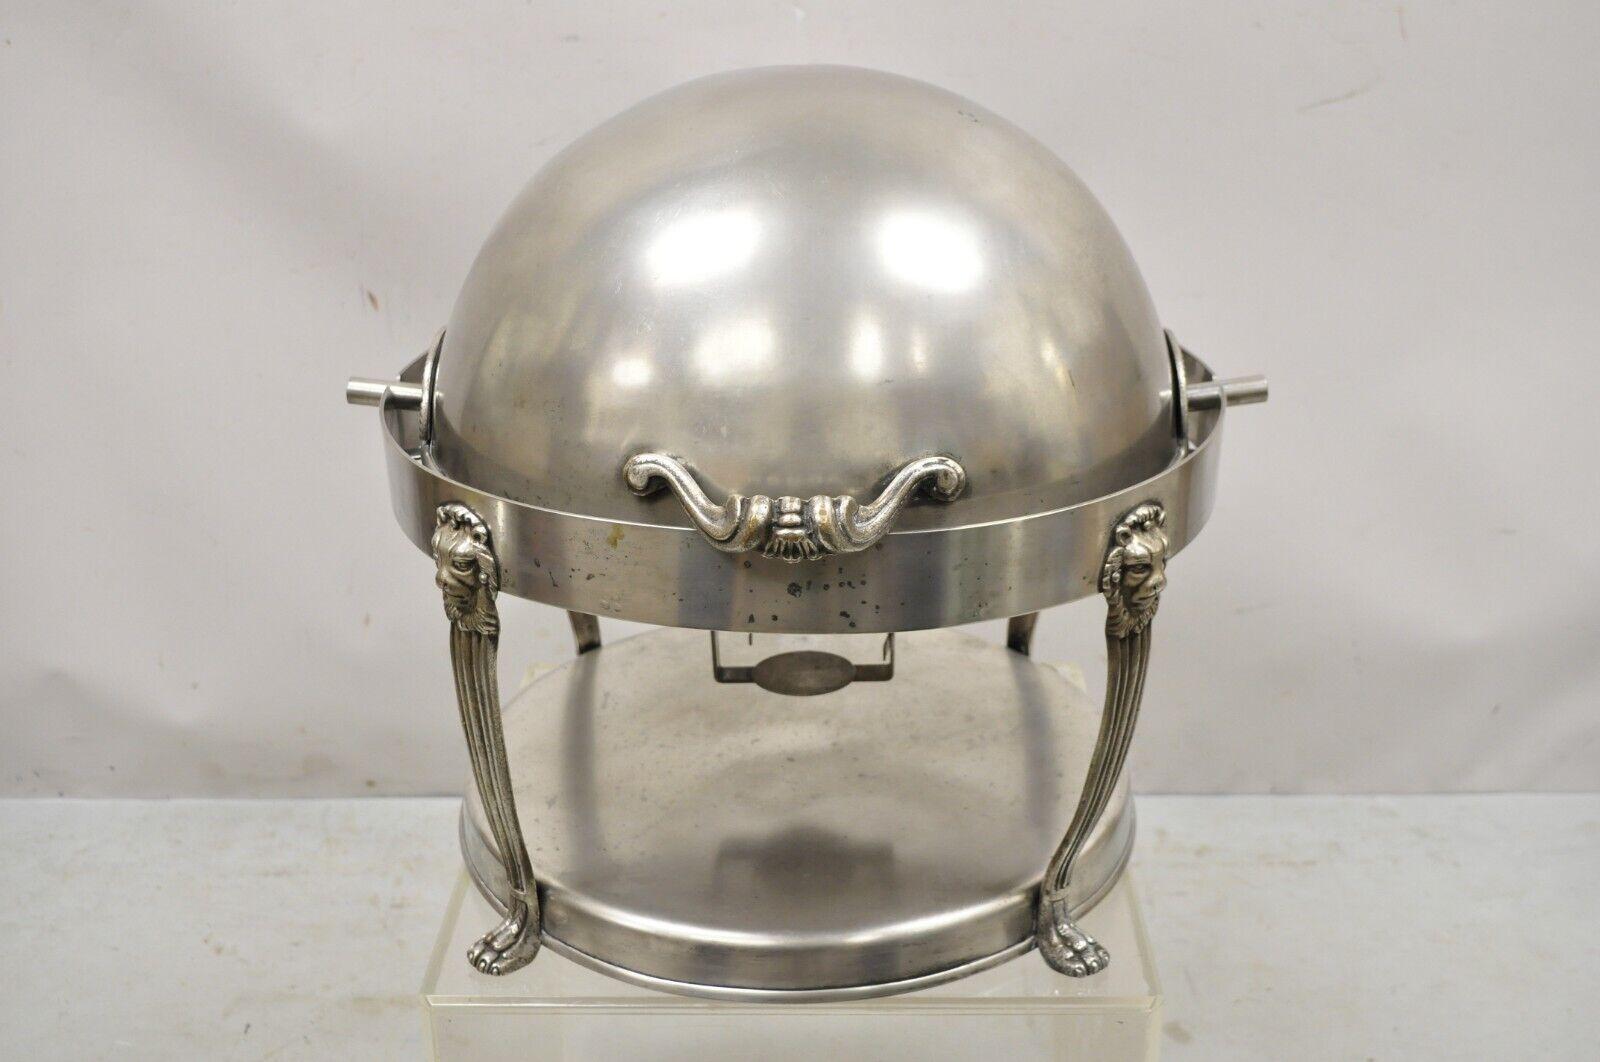 Vintage Regency Style silver plated steel Round Chafing dish service piece with Lions. Item features a removable interior divider, lion paw feet, lion heads, ornate handle, dome top, very nice vintage item, great style and form. Circa Early to Mid